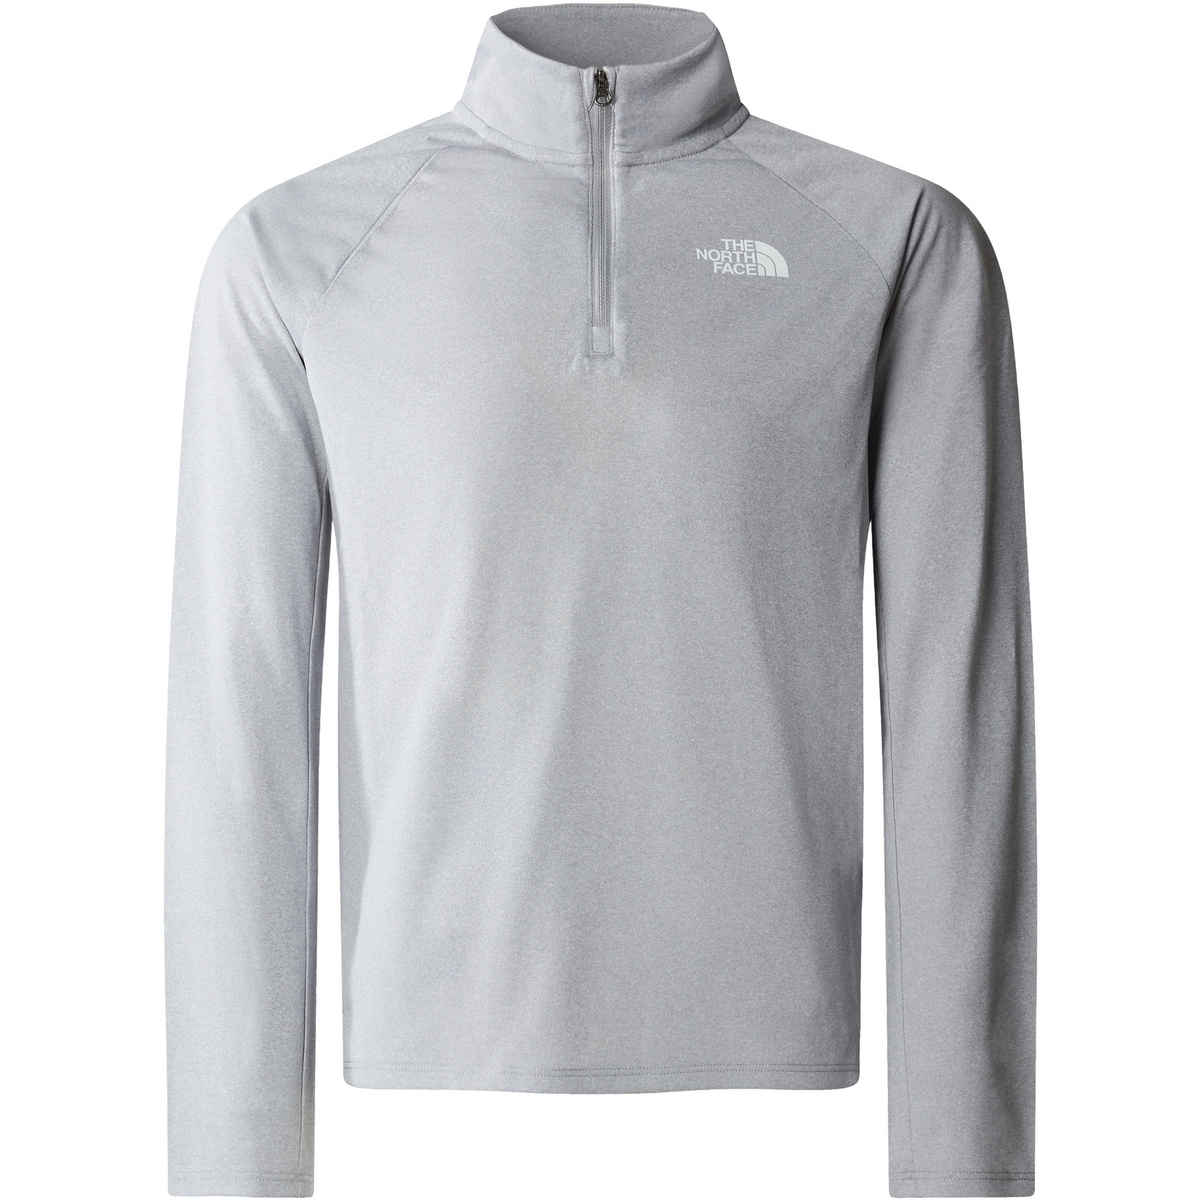 The North Face Kinder Never Stop 1/4 Zip Longsleeve von The North Face